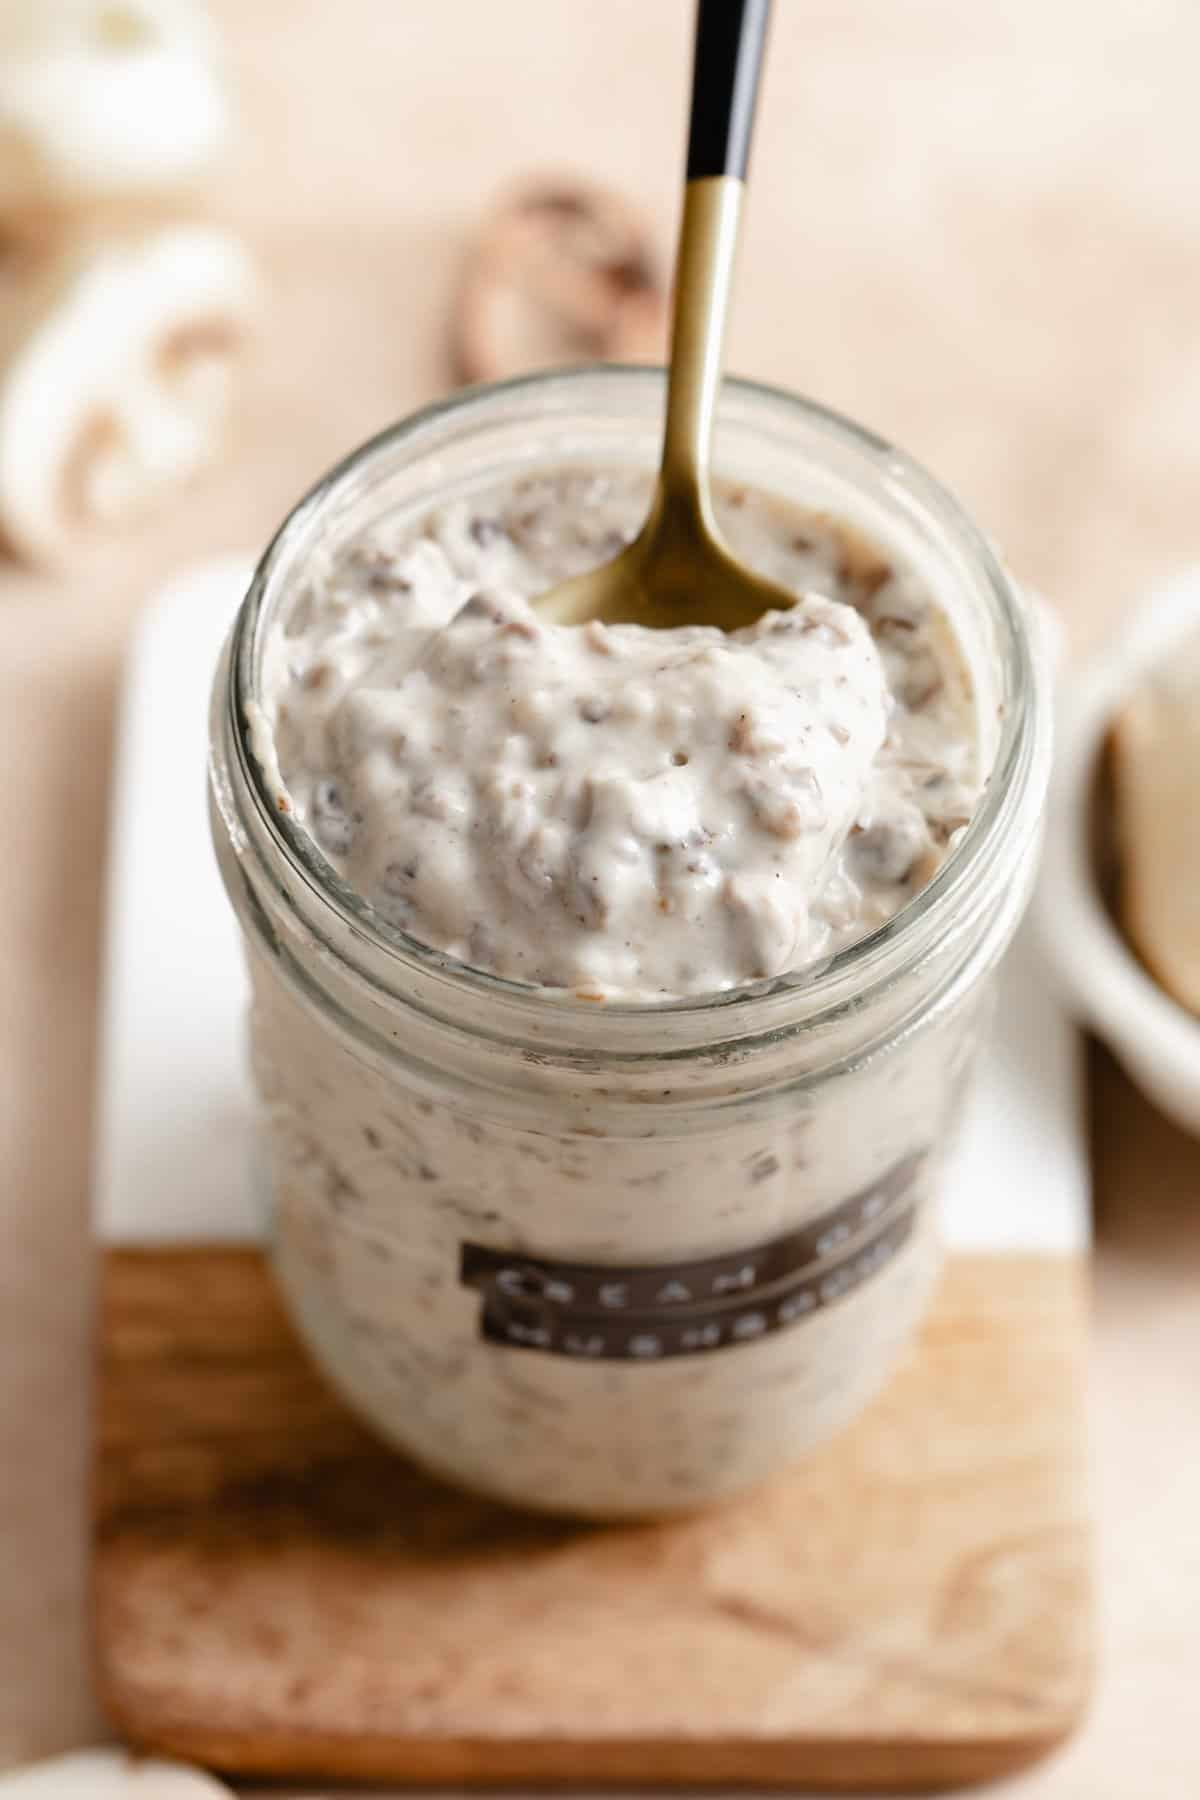 Jar of cream of mushroom soup with a spoon.